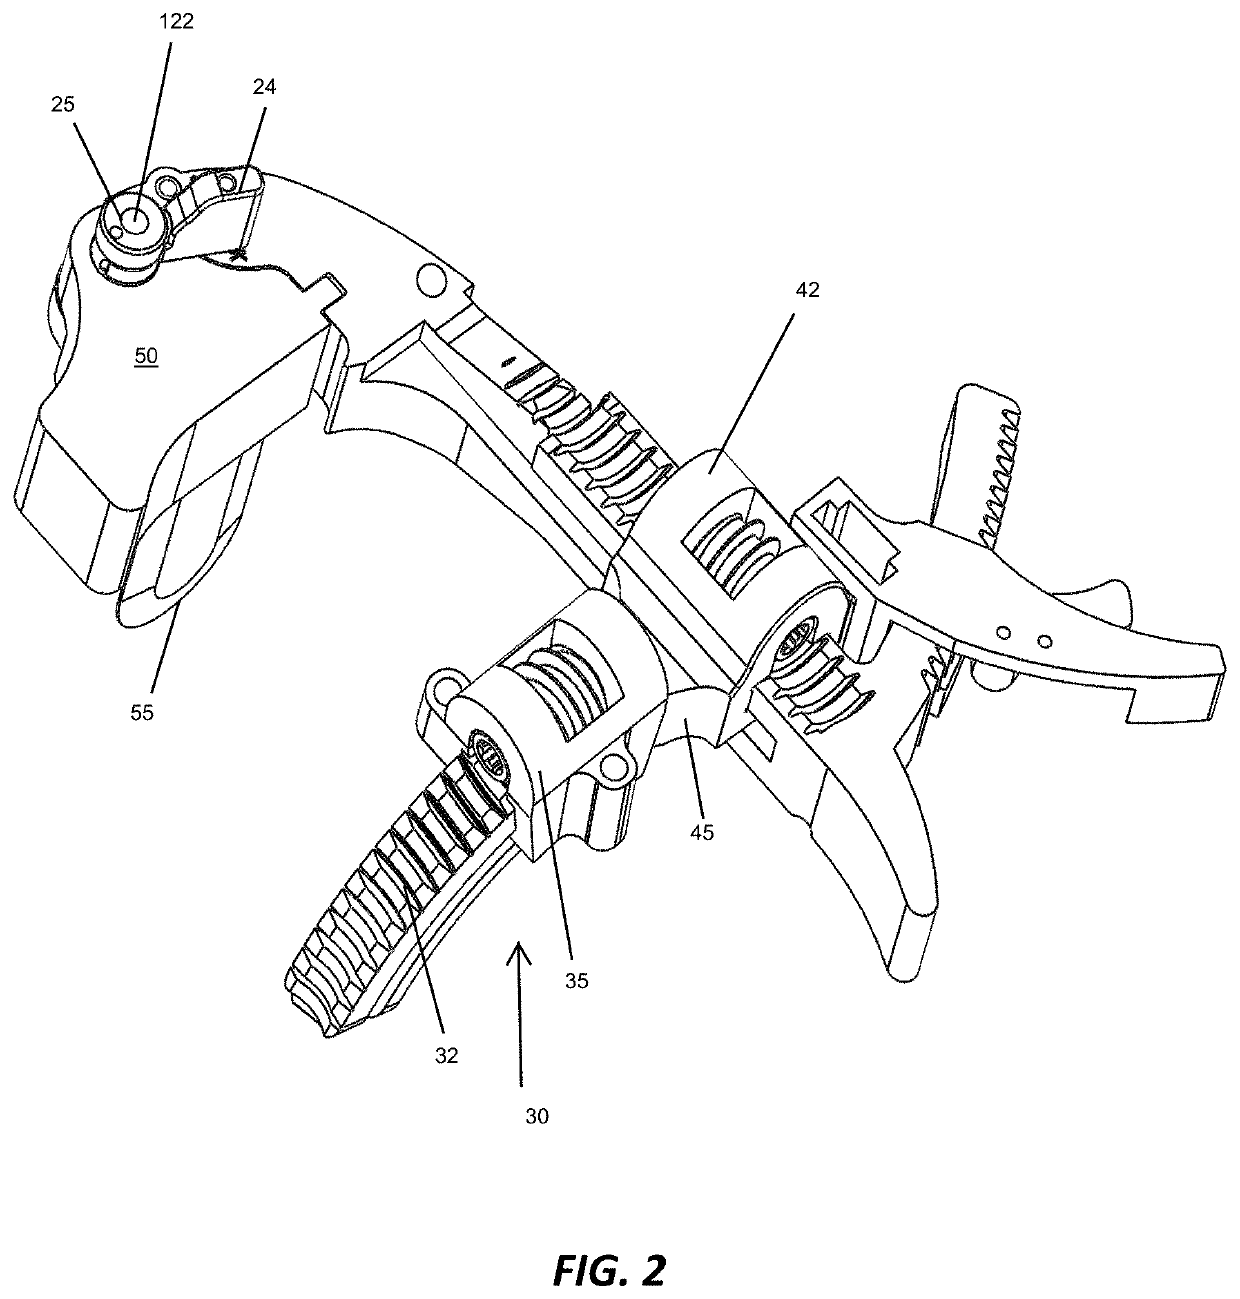 Bone align and joint preparation device and method